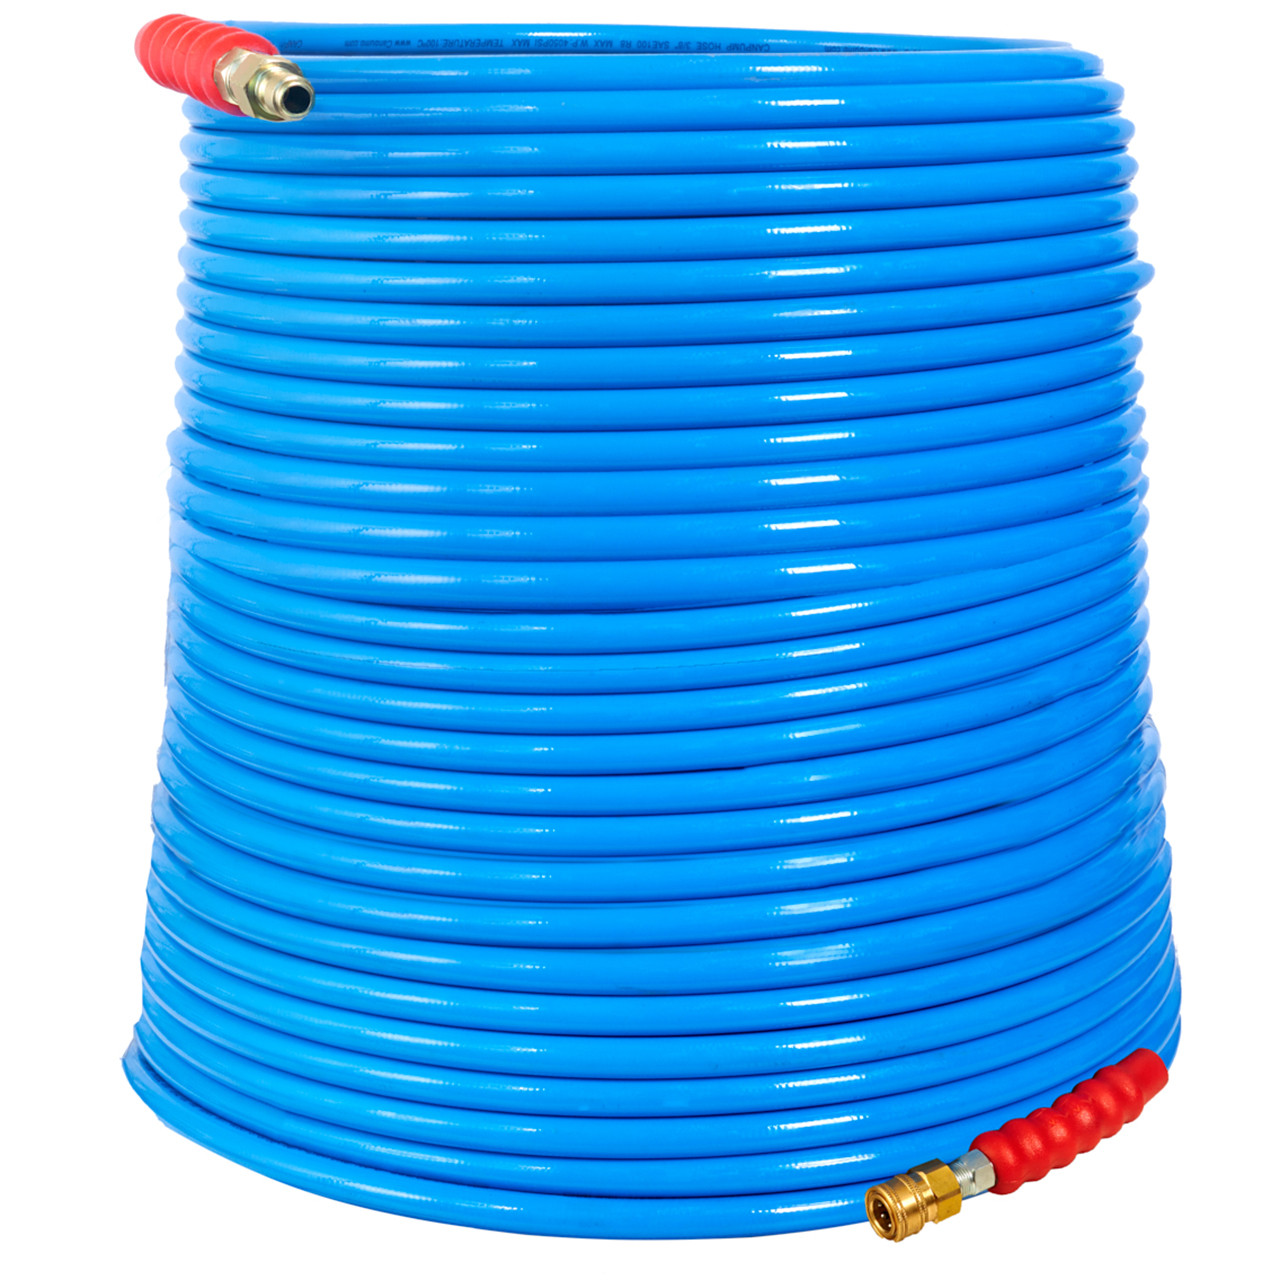 1/4-in Hot Water Thermoplastic Blue Hose, 4000 psi, Quick-Connect